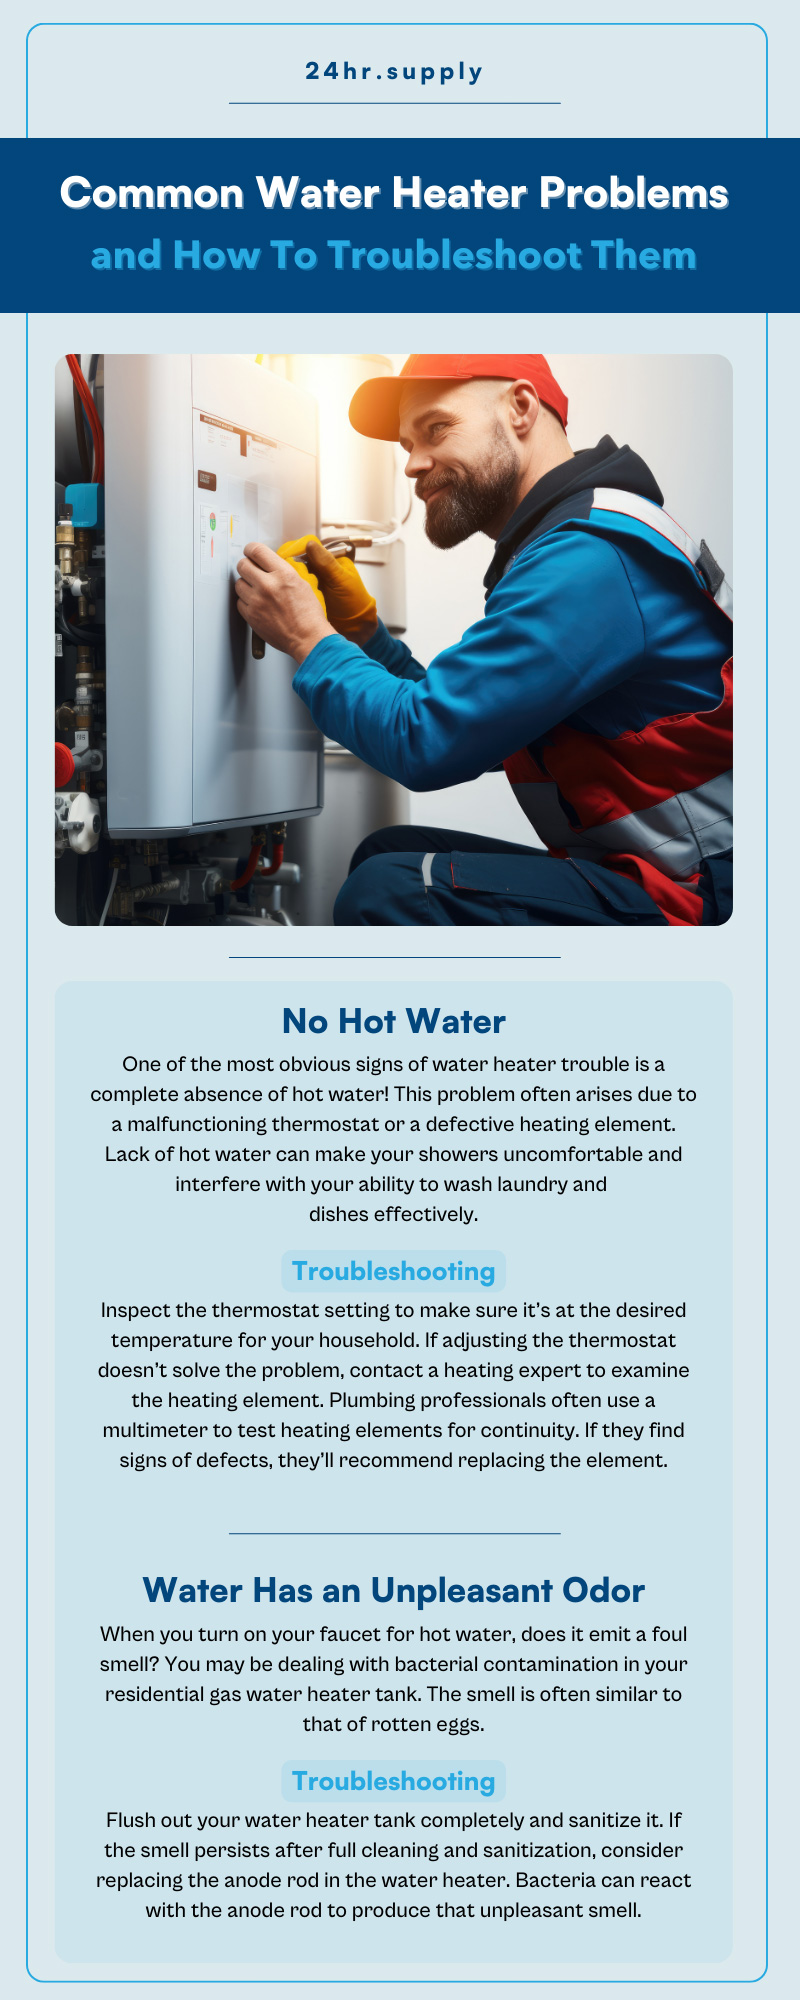 8 Common Water Heater Problems and How To Troubleshoot Them